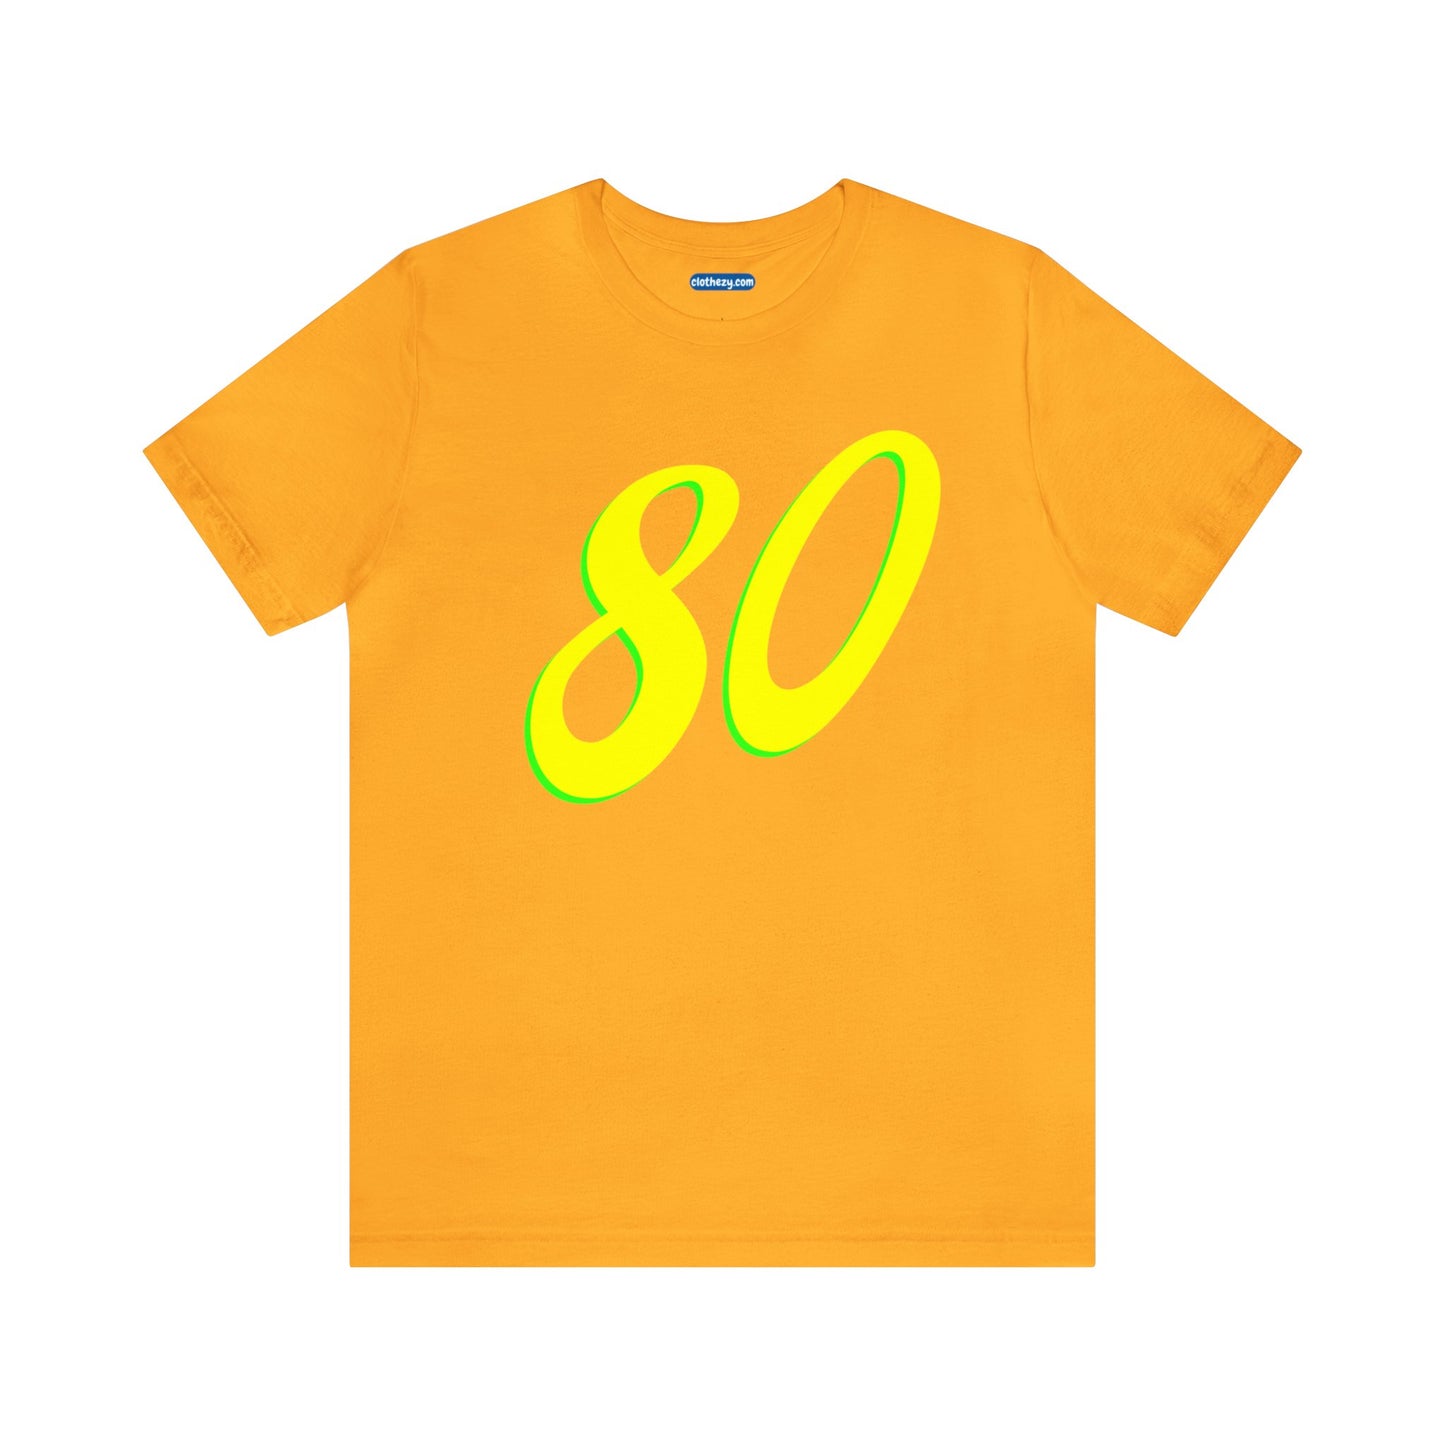 Number 80 Design - Soft Cotton Tee for birthdays and celebrations, Gift for friends and family, Multiple Options by clothezy.com in Green Heather Size Small - Buy Now